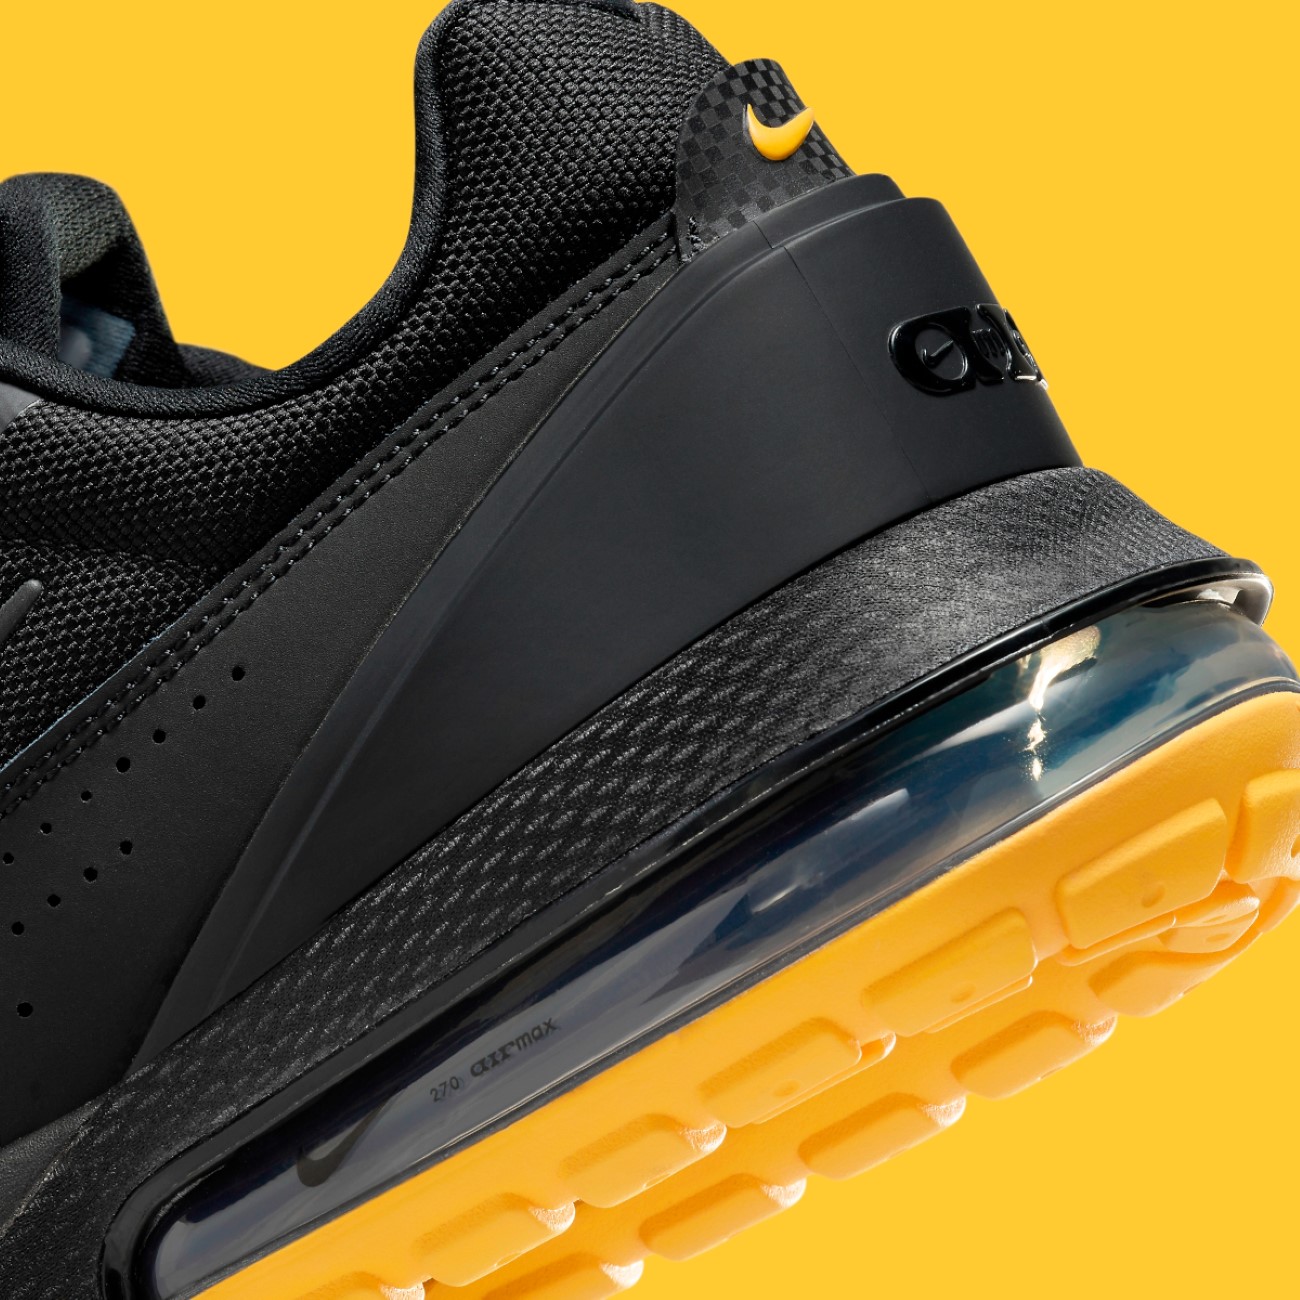 Nike Air Max Pulse ''Black/Yellow'' colorway: A sneaker enthusiast's delight